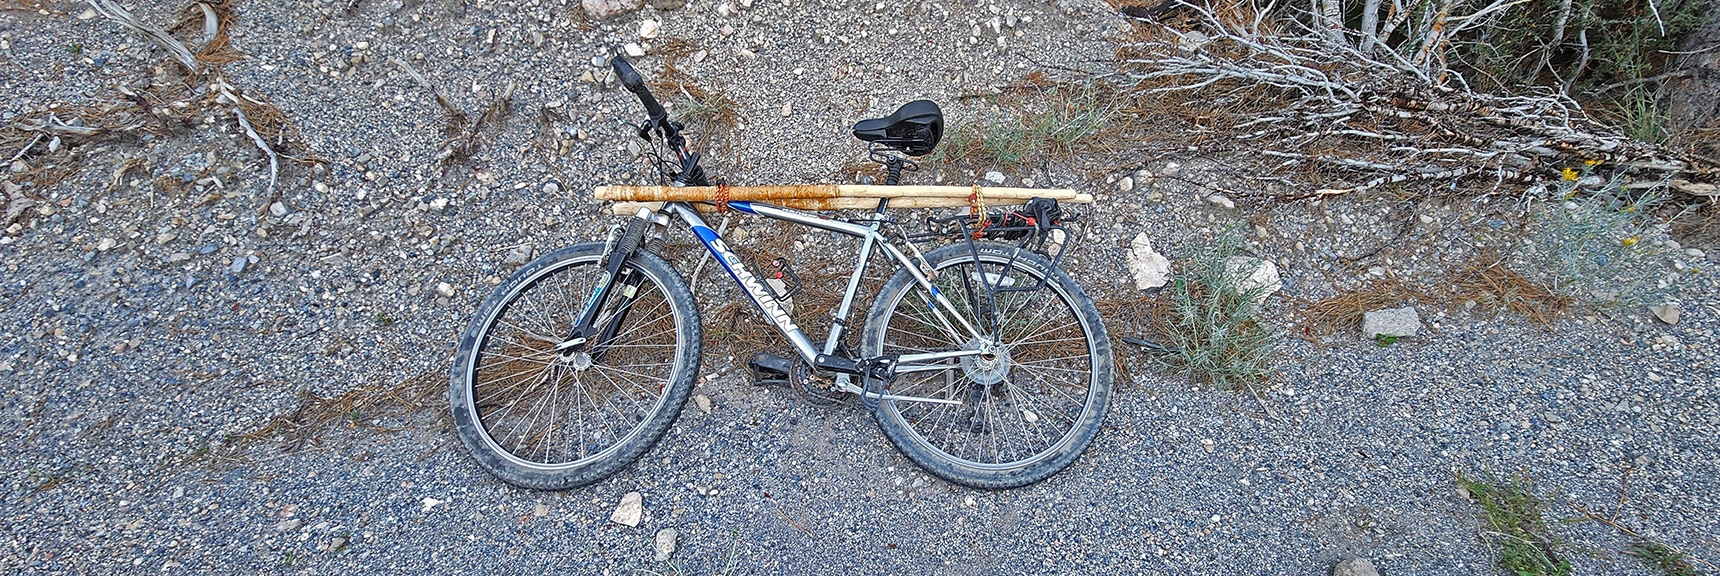 Mountain Bike Now Ready for Final 5-6-Mile Stretch from Deer Creek Picnic Area to Foxtail Picnic Area | Mummy Mountain Grand Crossing | Lee Canyon to Deer Creek Road | Mt Charleston Wilderness | Spring Mountains, Nevada |